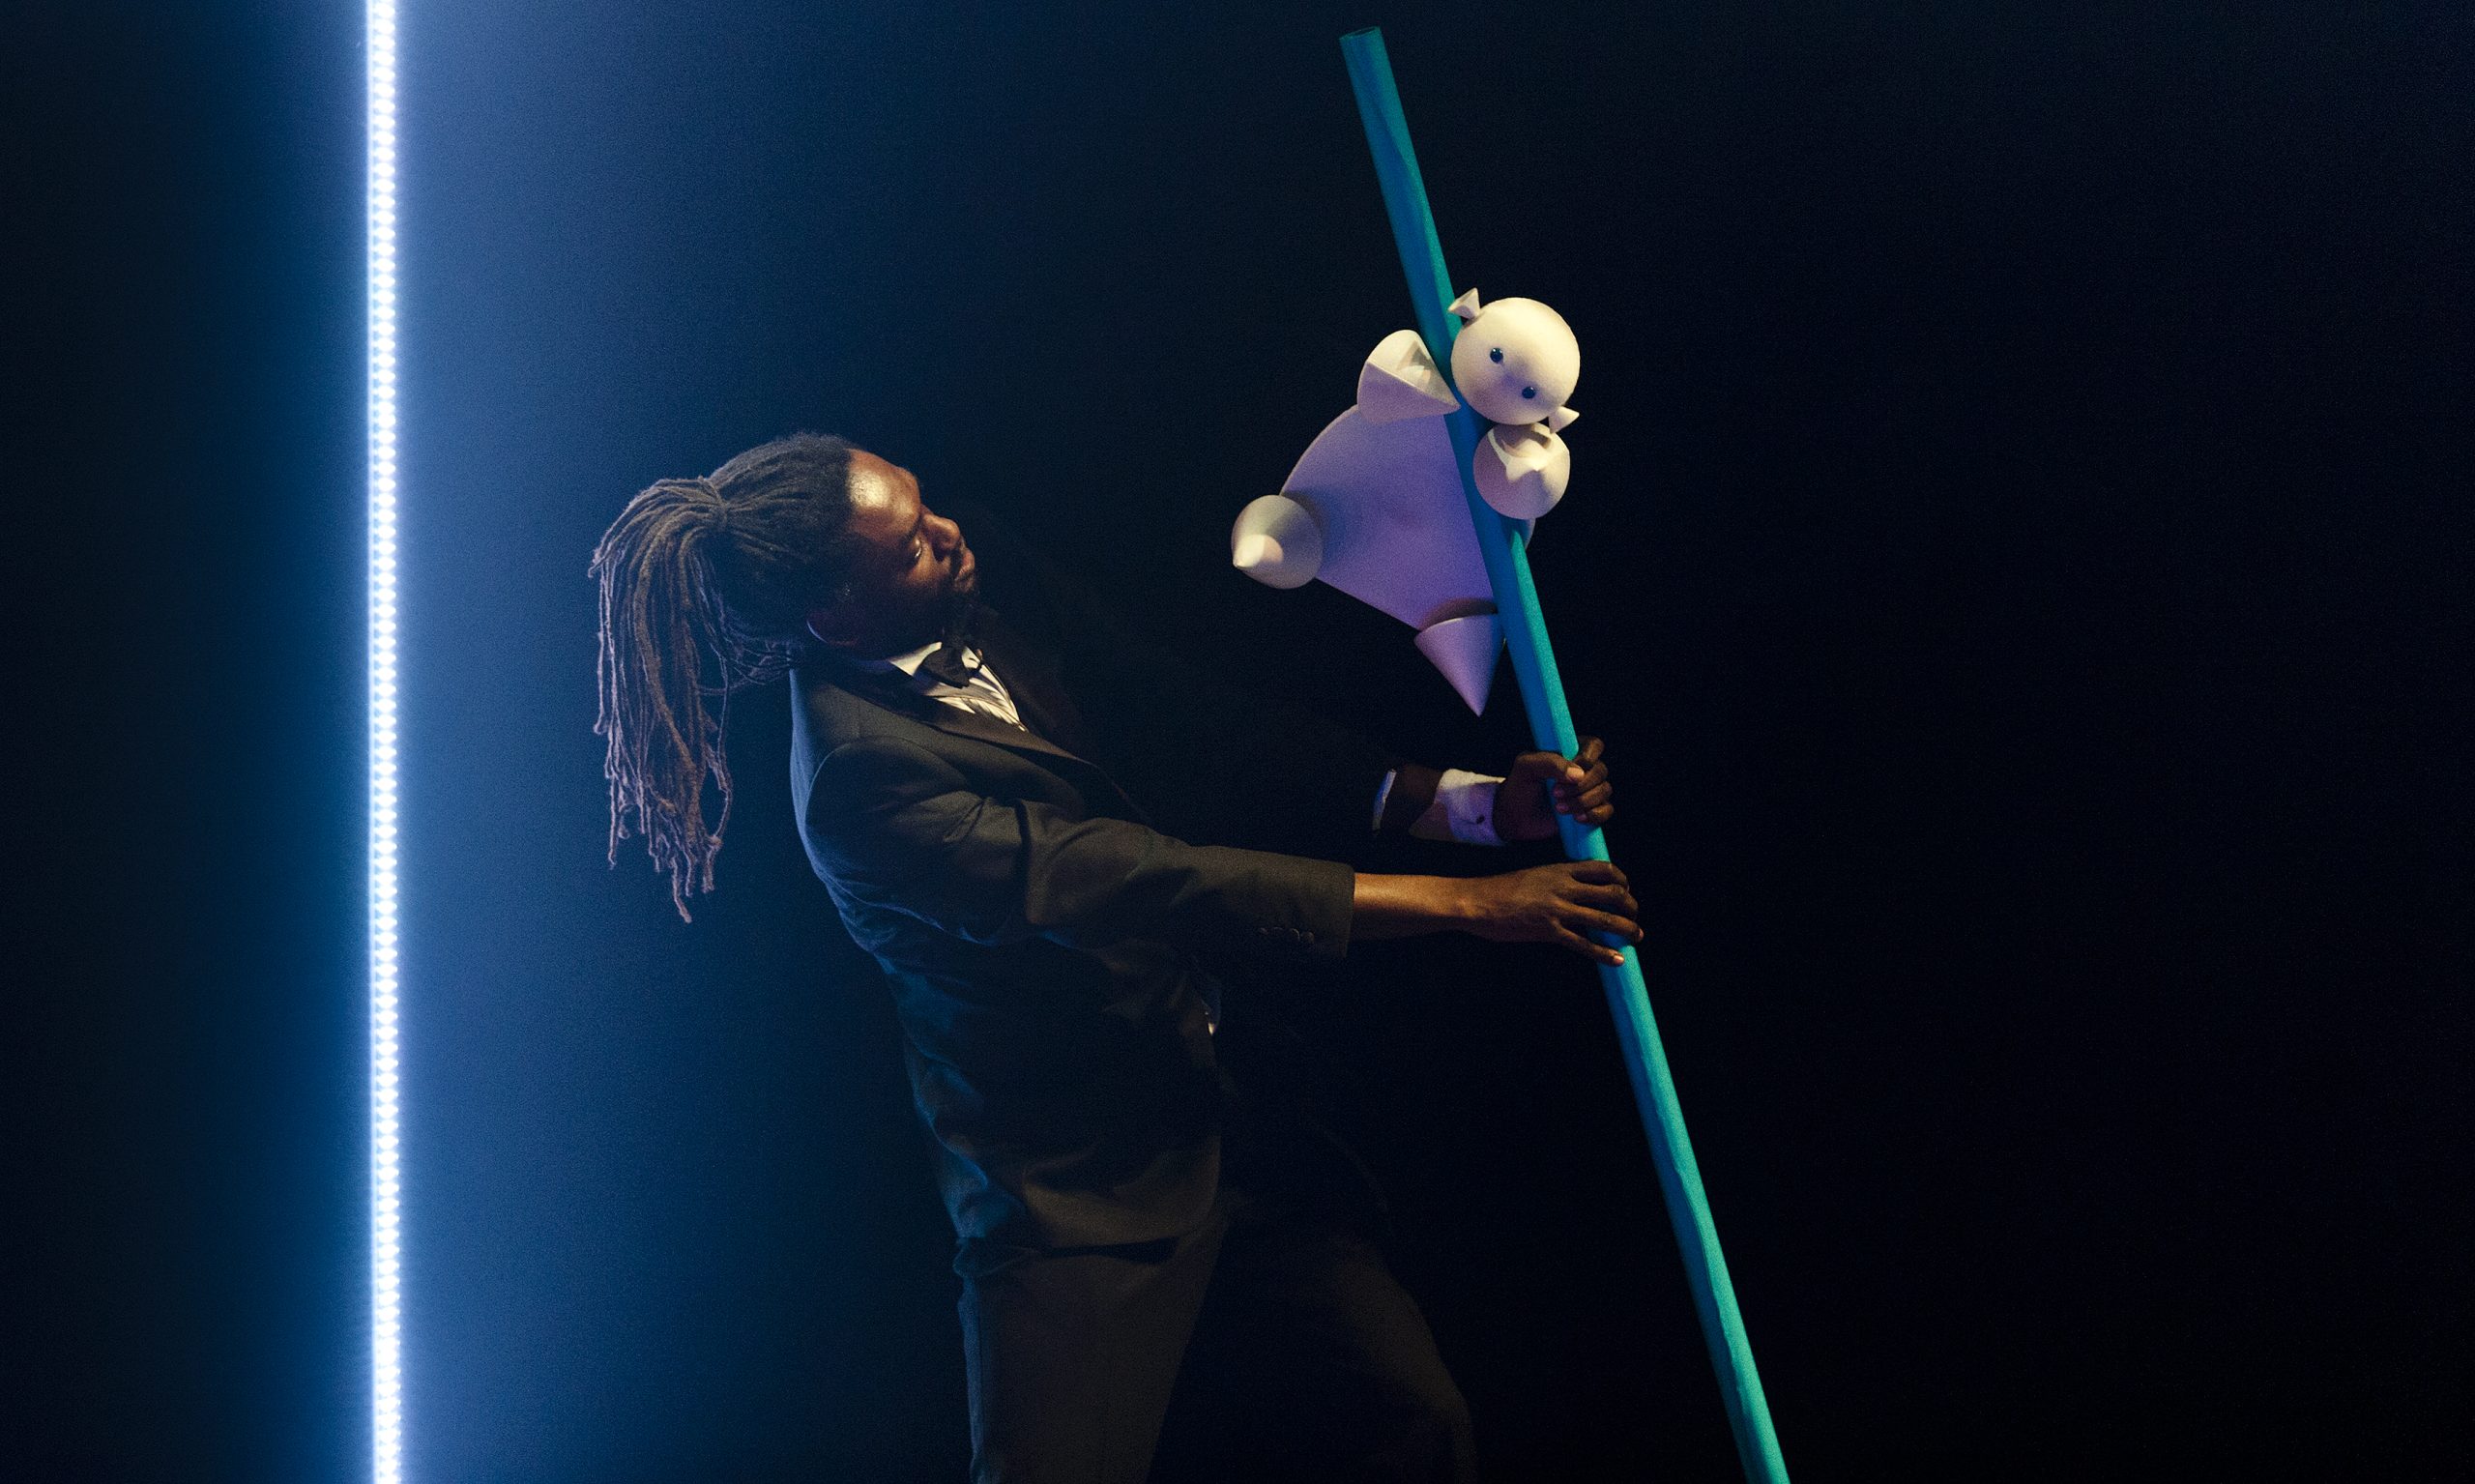 A performer with dreadlocks holds a blue pole at an angle as a puppet baby slides down it.